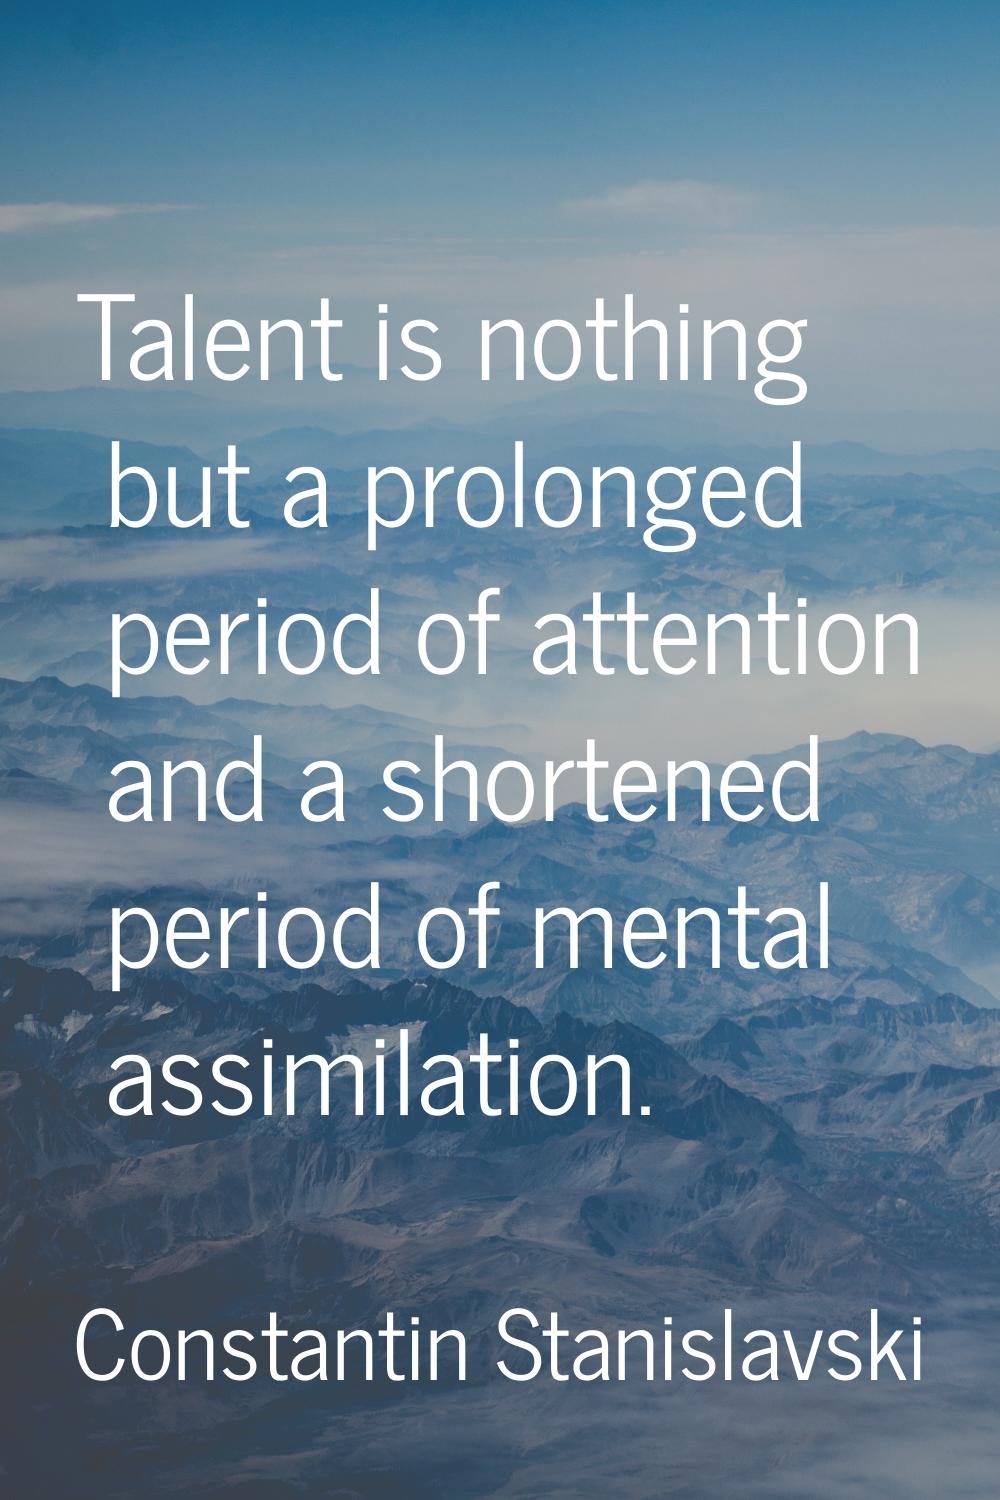 Talent is nothing but a prolonged period of attention and a shortened period of mental assimilation